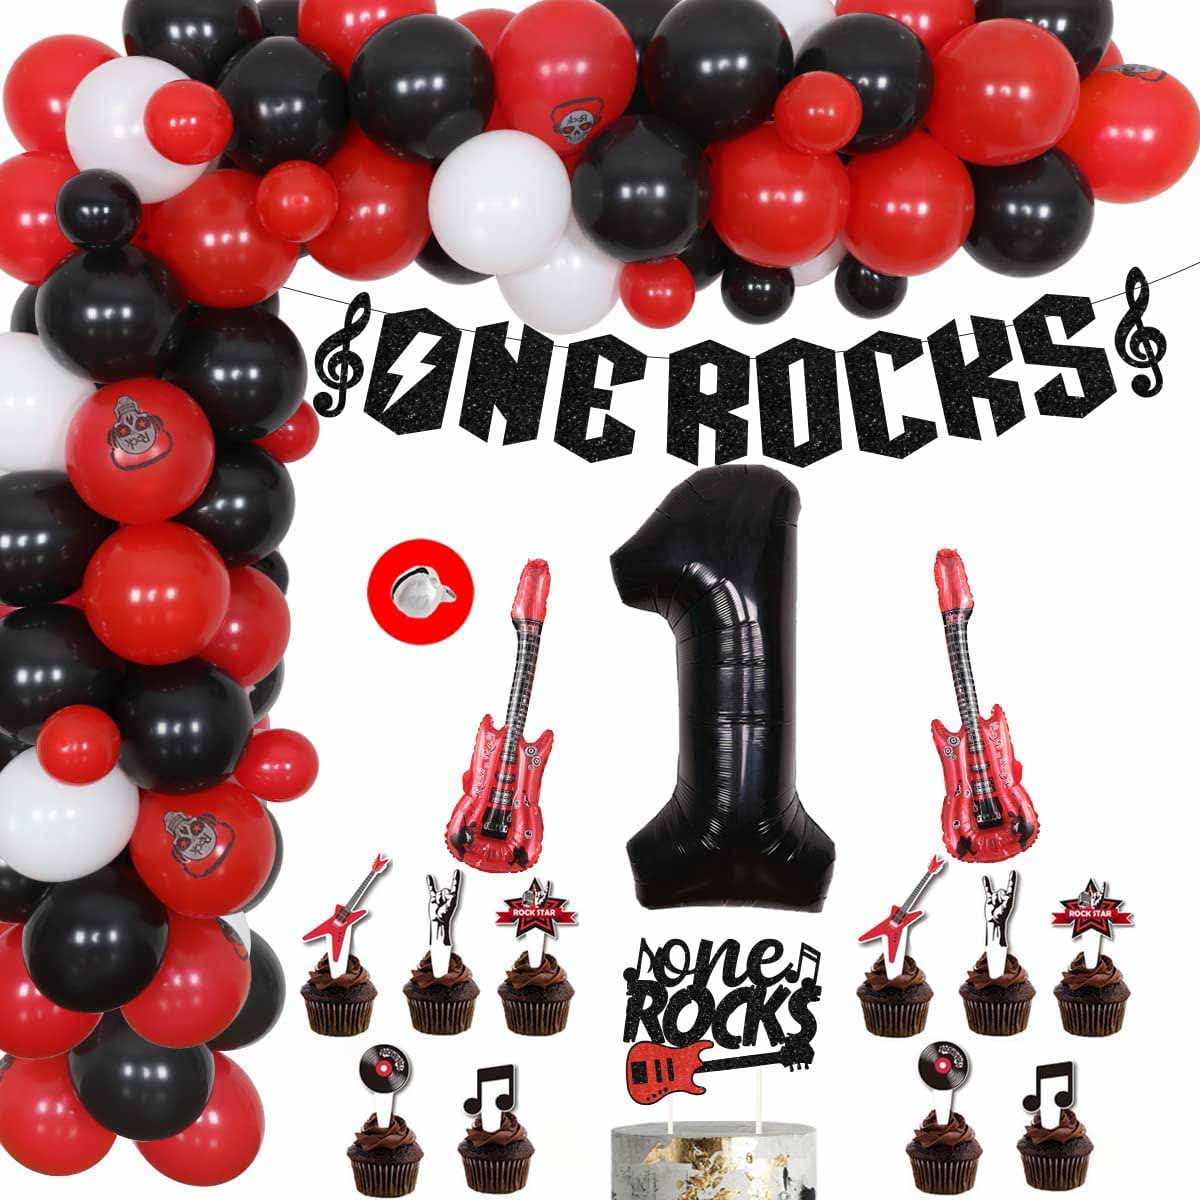  Crenics Rock and Roll Party Decorations - Large Born to Rock  Backdrop Banner, Balloons Arch Kit and Guitar Foil Balloons for Rock Star  Music Theme Birthday Party Supplies : Toys 